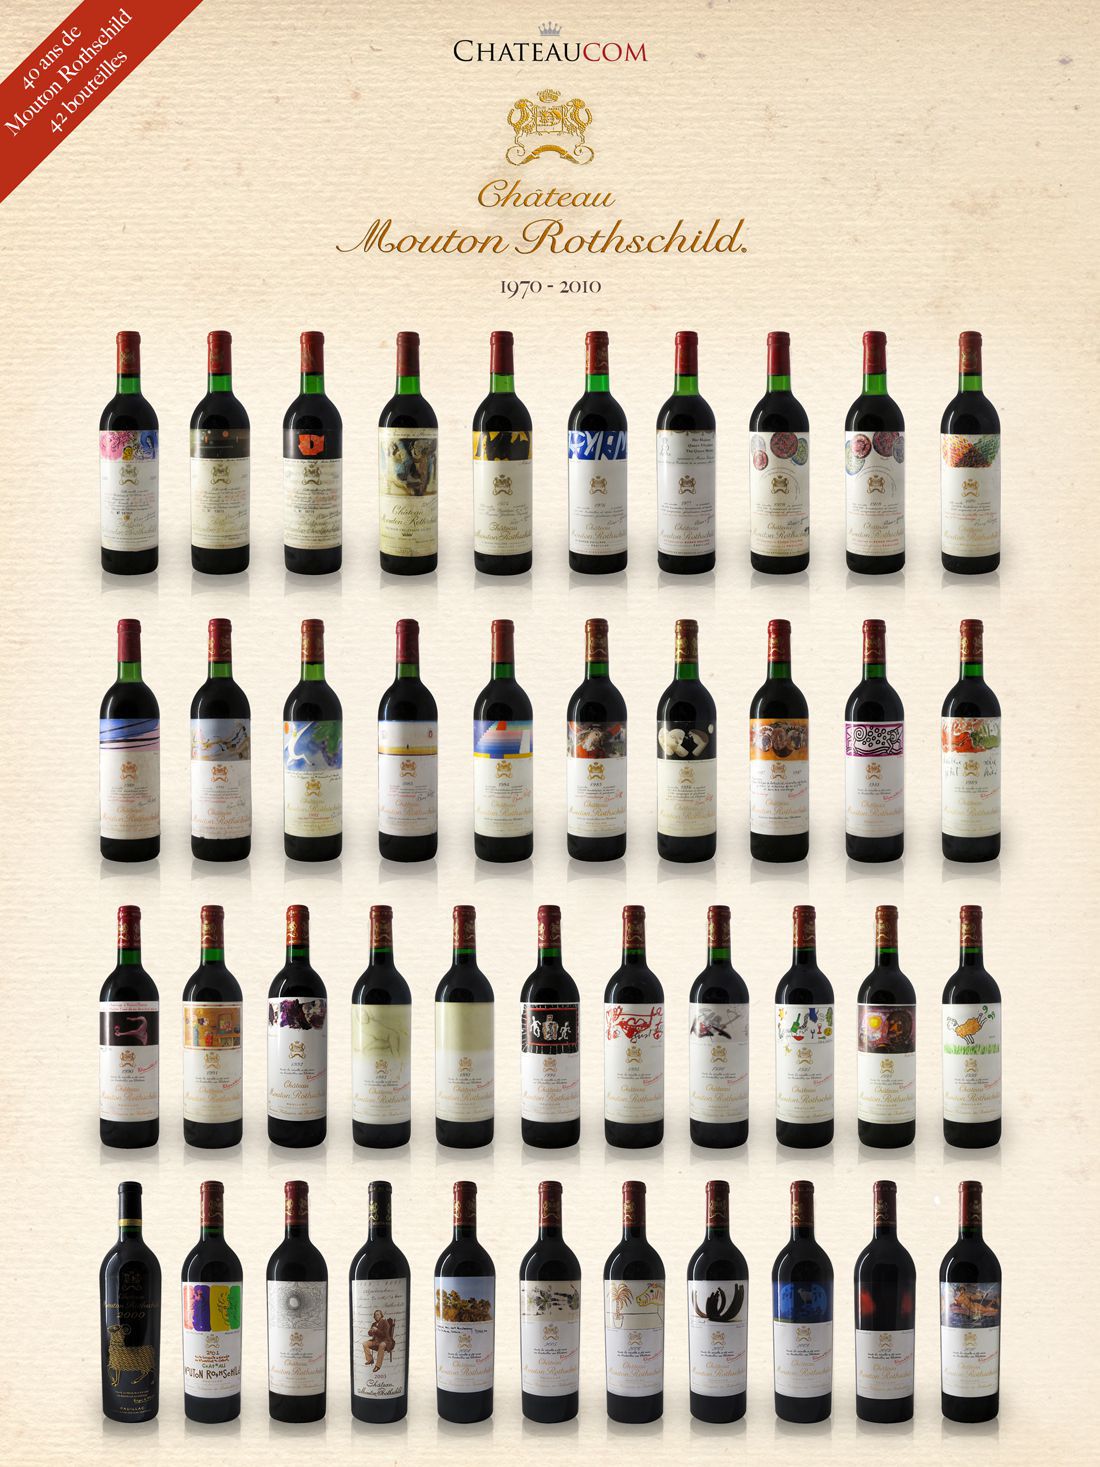 Collection Château Mouton Rothschild 1970-2010 - 40 years of Mouton Rothschild